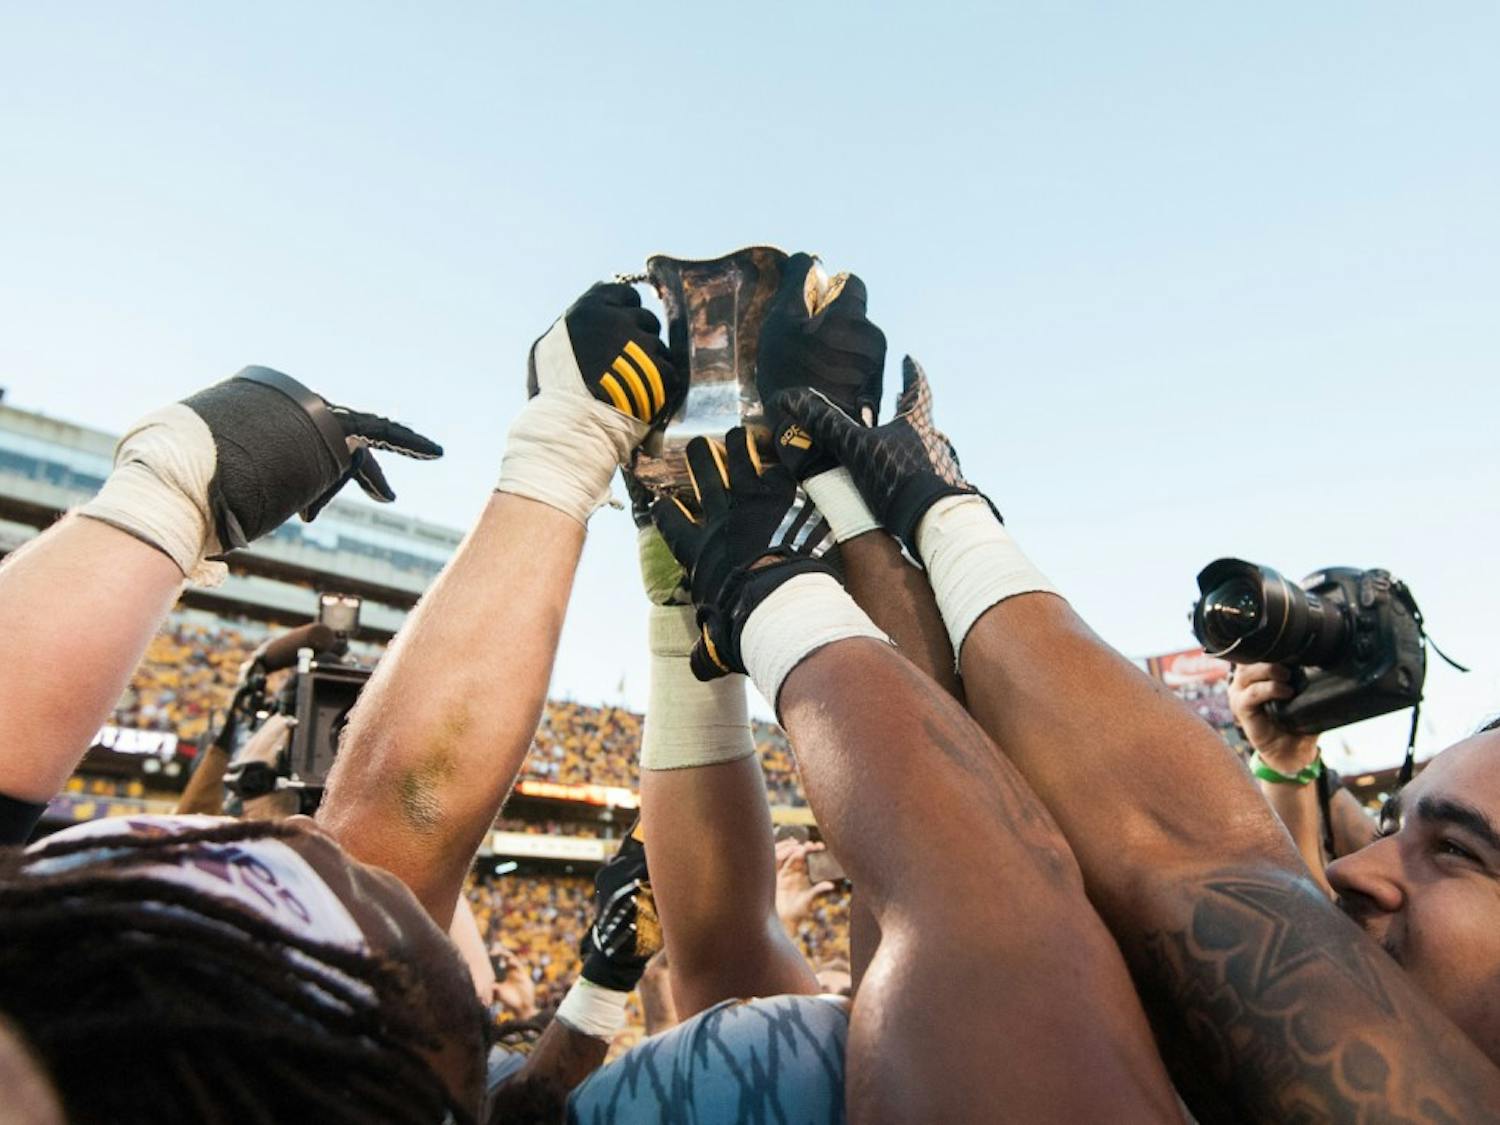 ASU football players lift the Territorial Cup in celebration after defeating UA on Saturday, Nov. 21, 2015, at Sun Devil Stadium in Tempe.